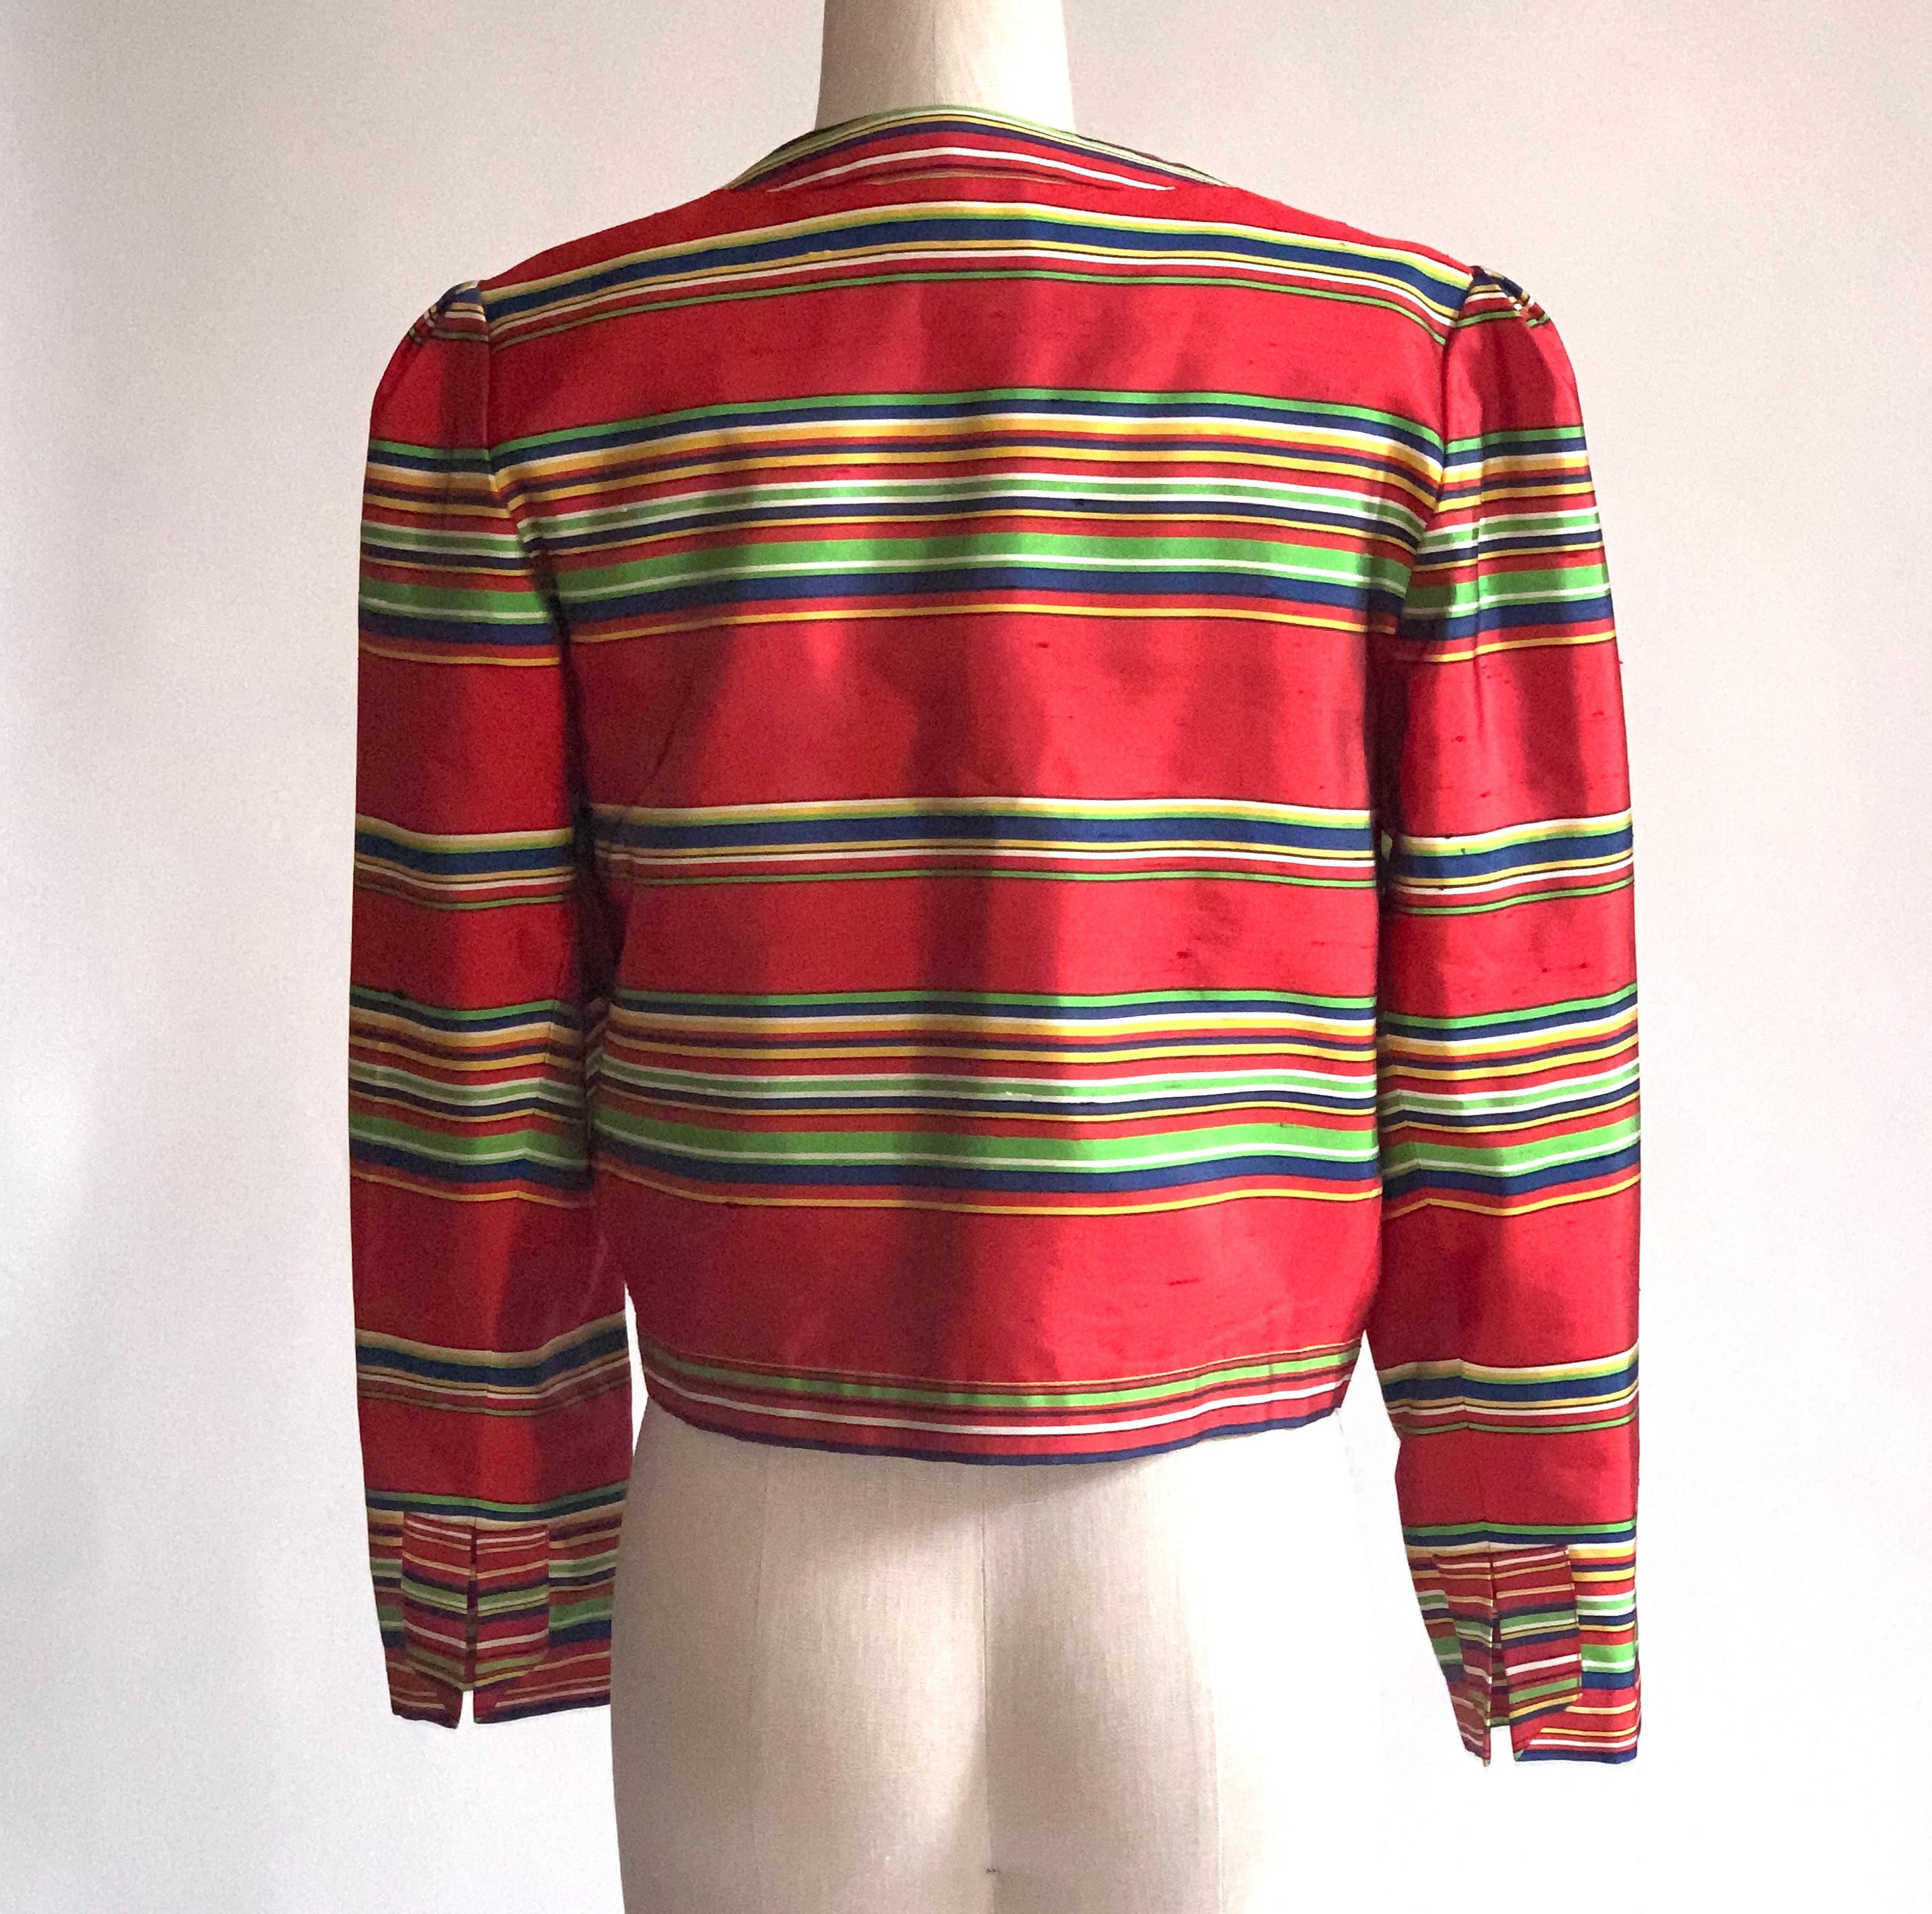 Women's Yves Saint Laurent 1990s Silk Jacket in Red, Green, Blue and Yellow Stripe For Sale